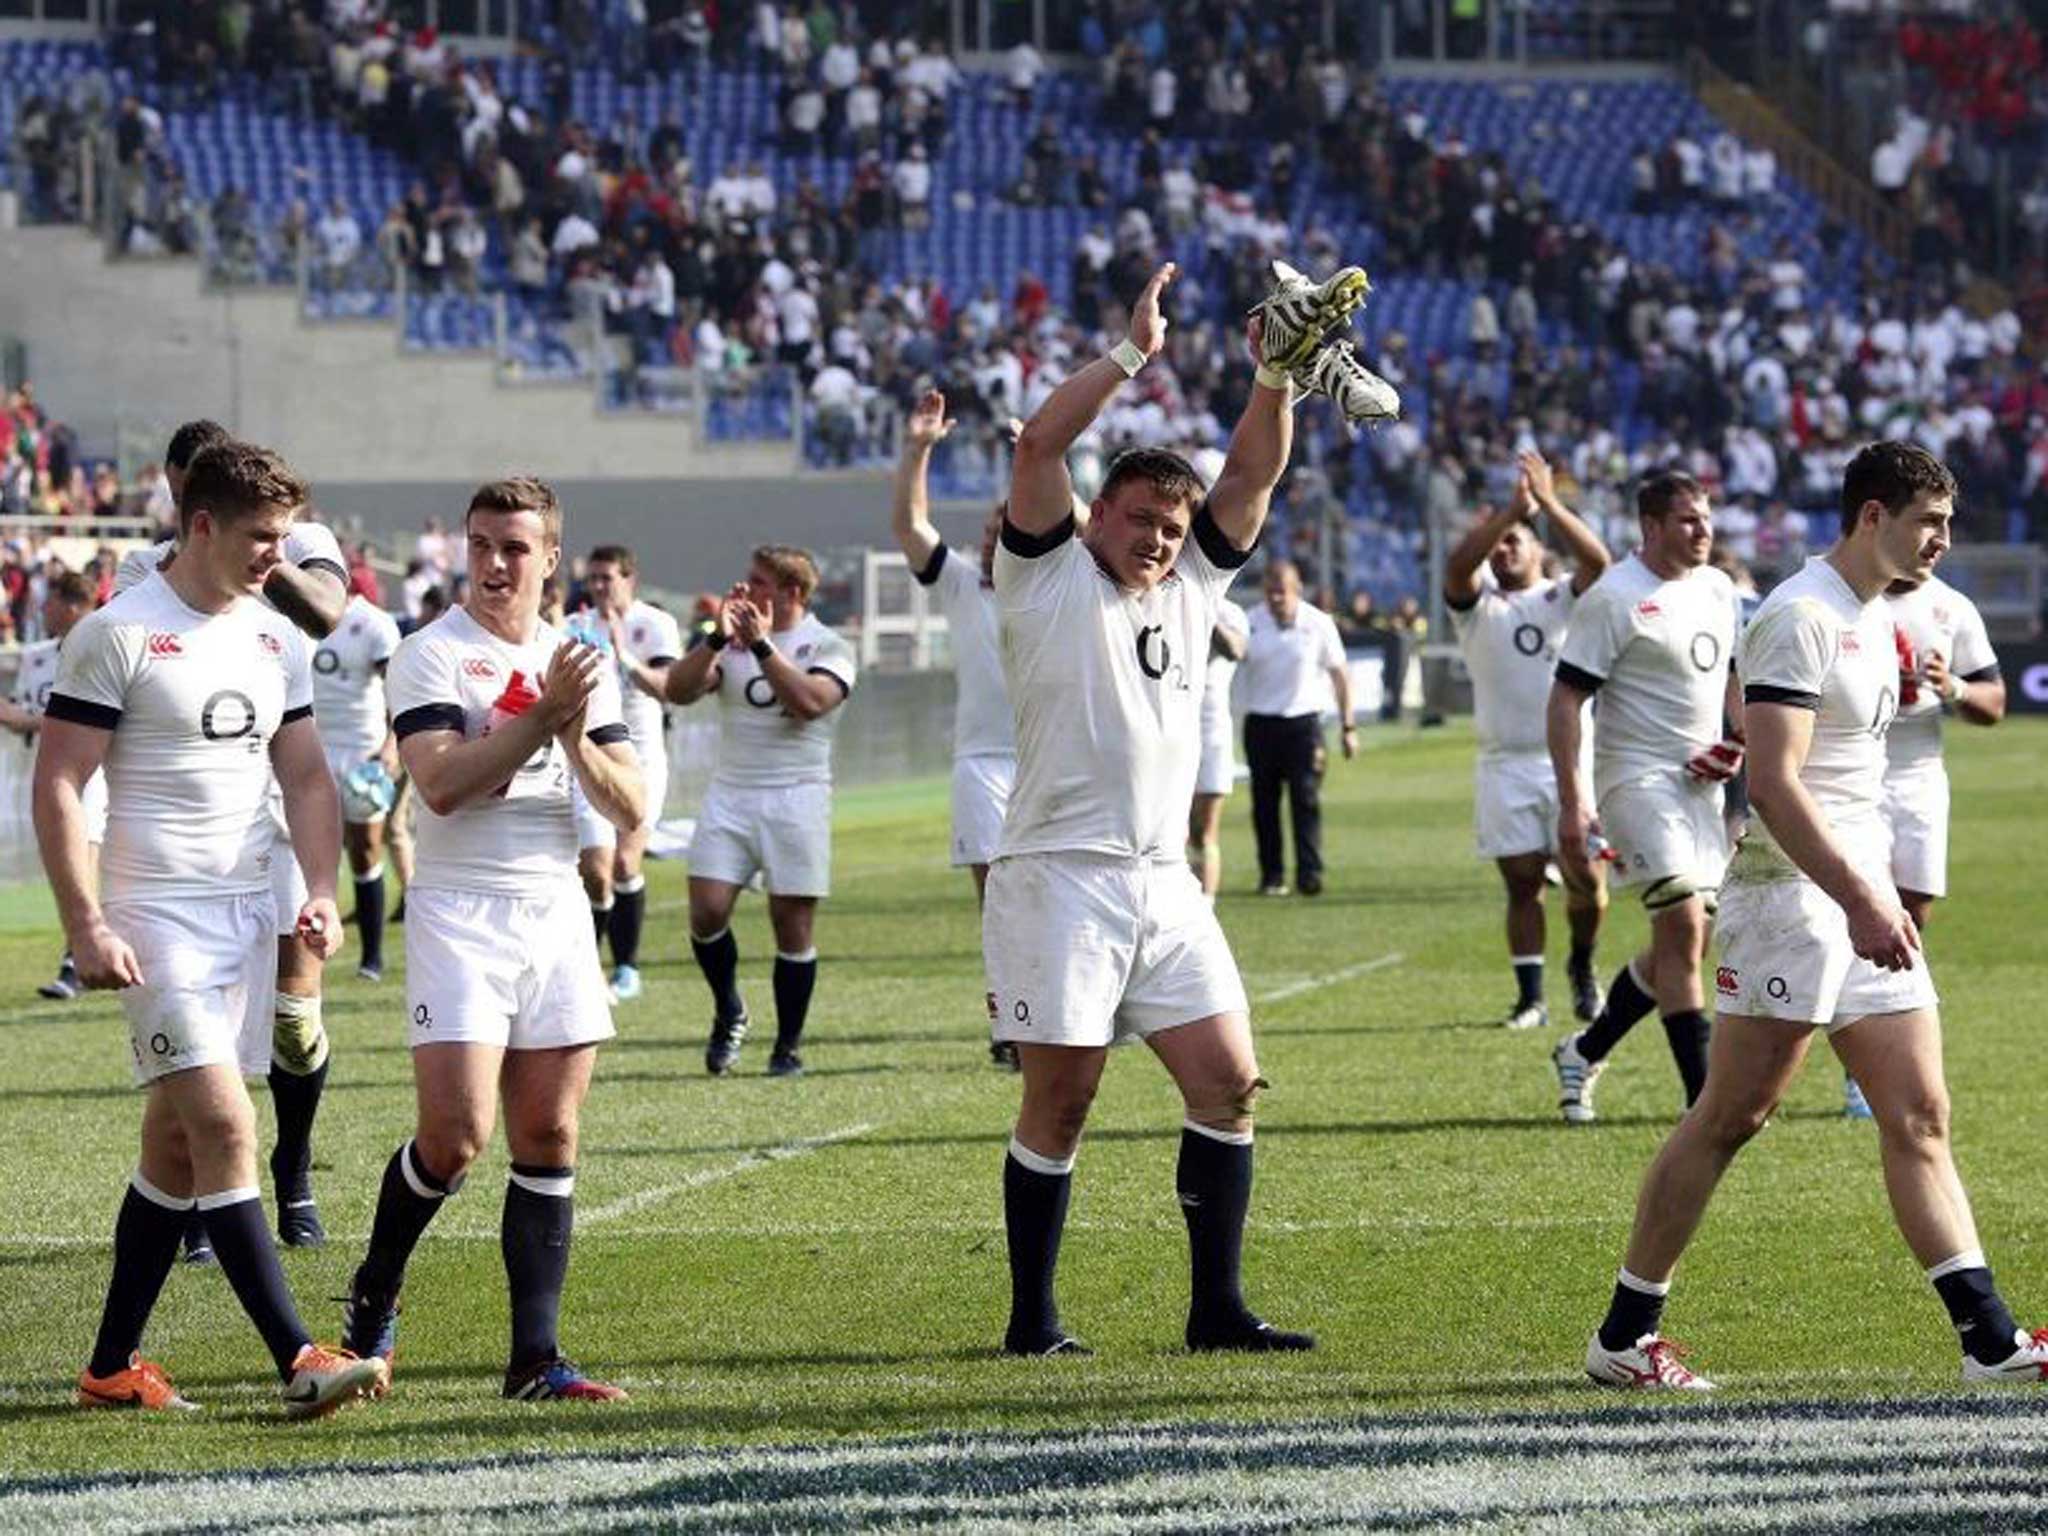 Rosy future: England players applaud the fans in Rome after their win which capped a strong Six Nations